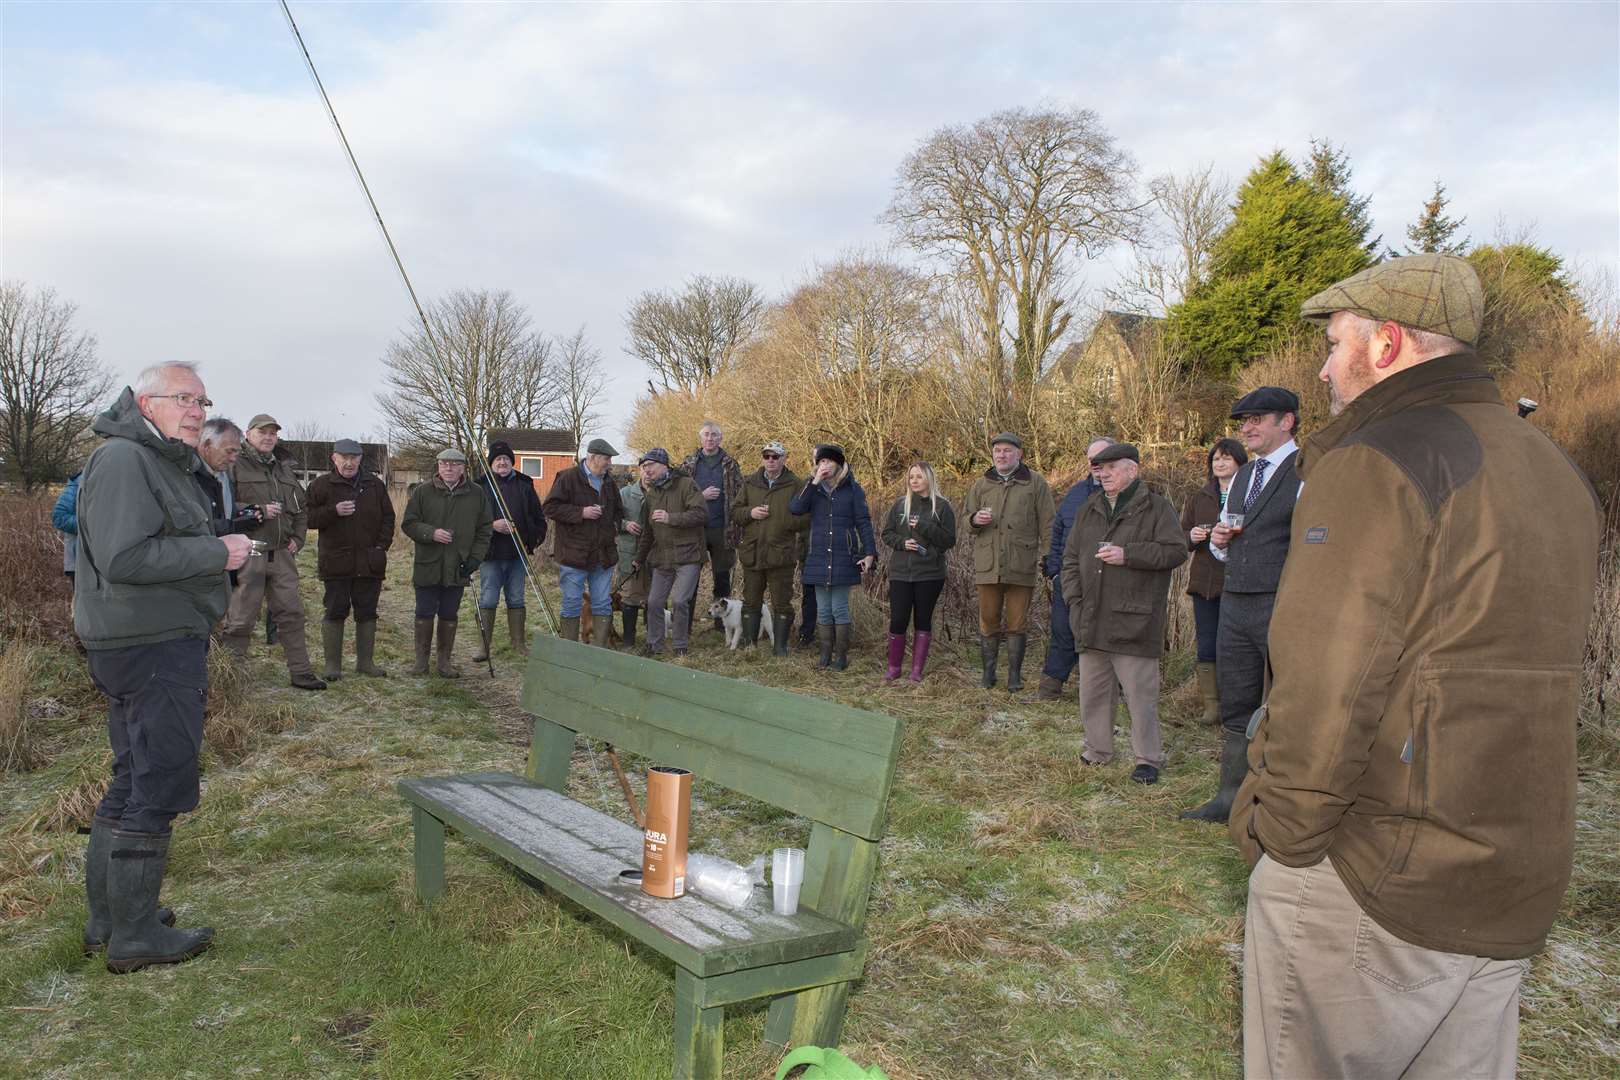 Alan Youngson, Caithness District Salmon Fishery Board's scientific adviser, addresses the anglers before toasting the new salmon season. Picture: Robert MacDonald / Northern Studios